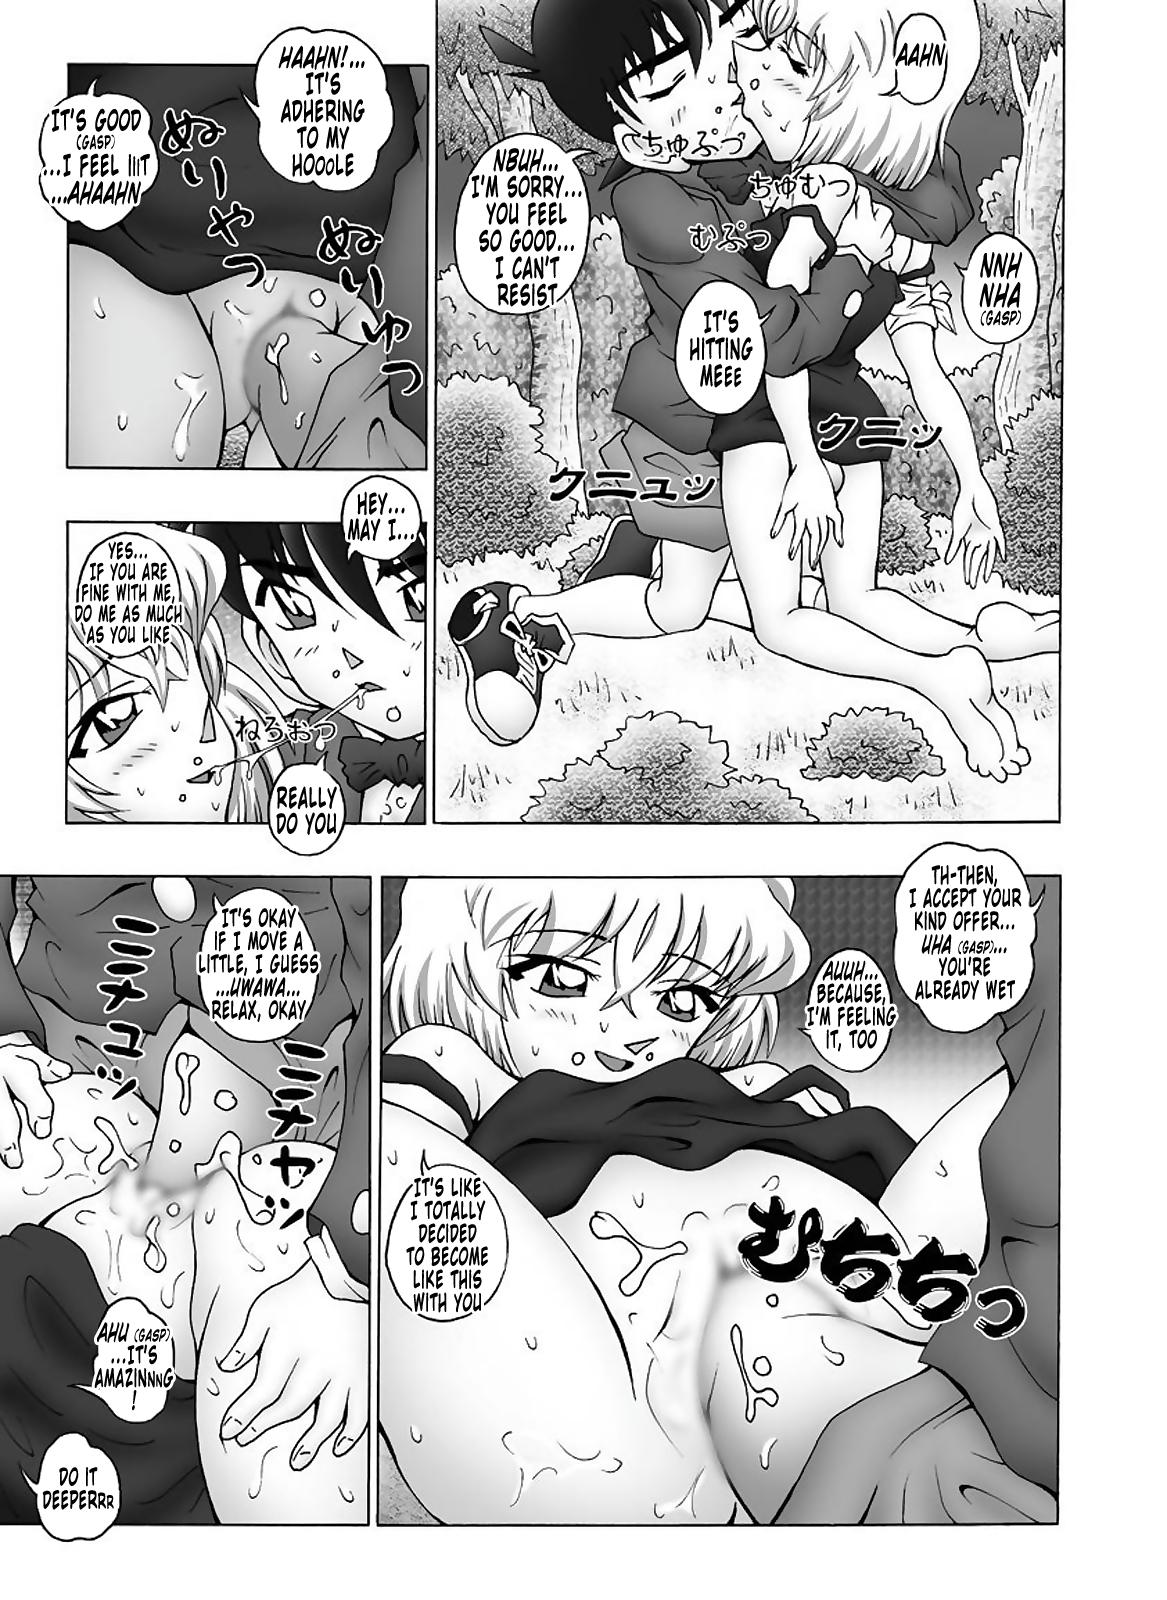 Virginity Bumbling Detective Conan - File 12: The Case of Back To The Future - Detective conan Porn Amateur - Page 12